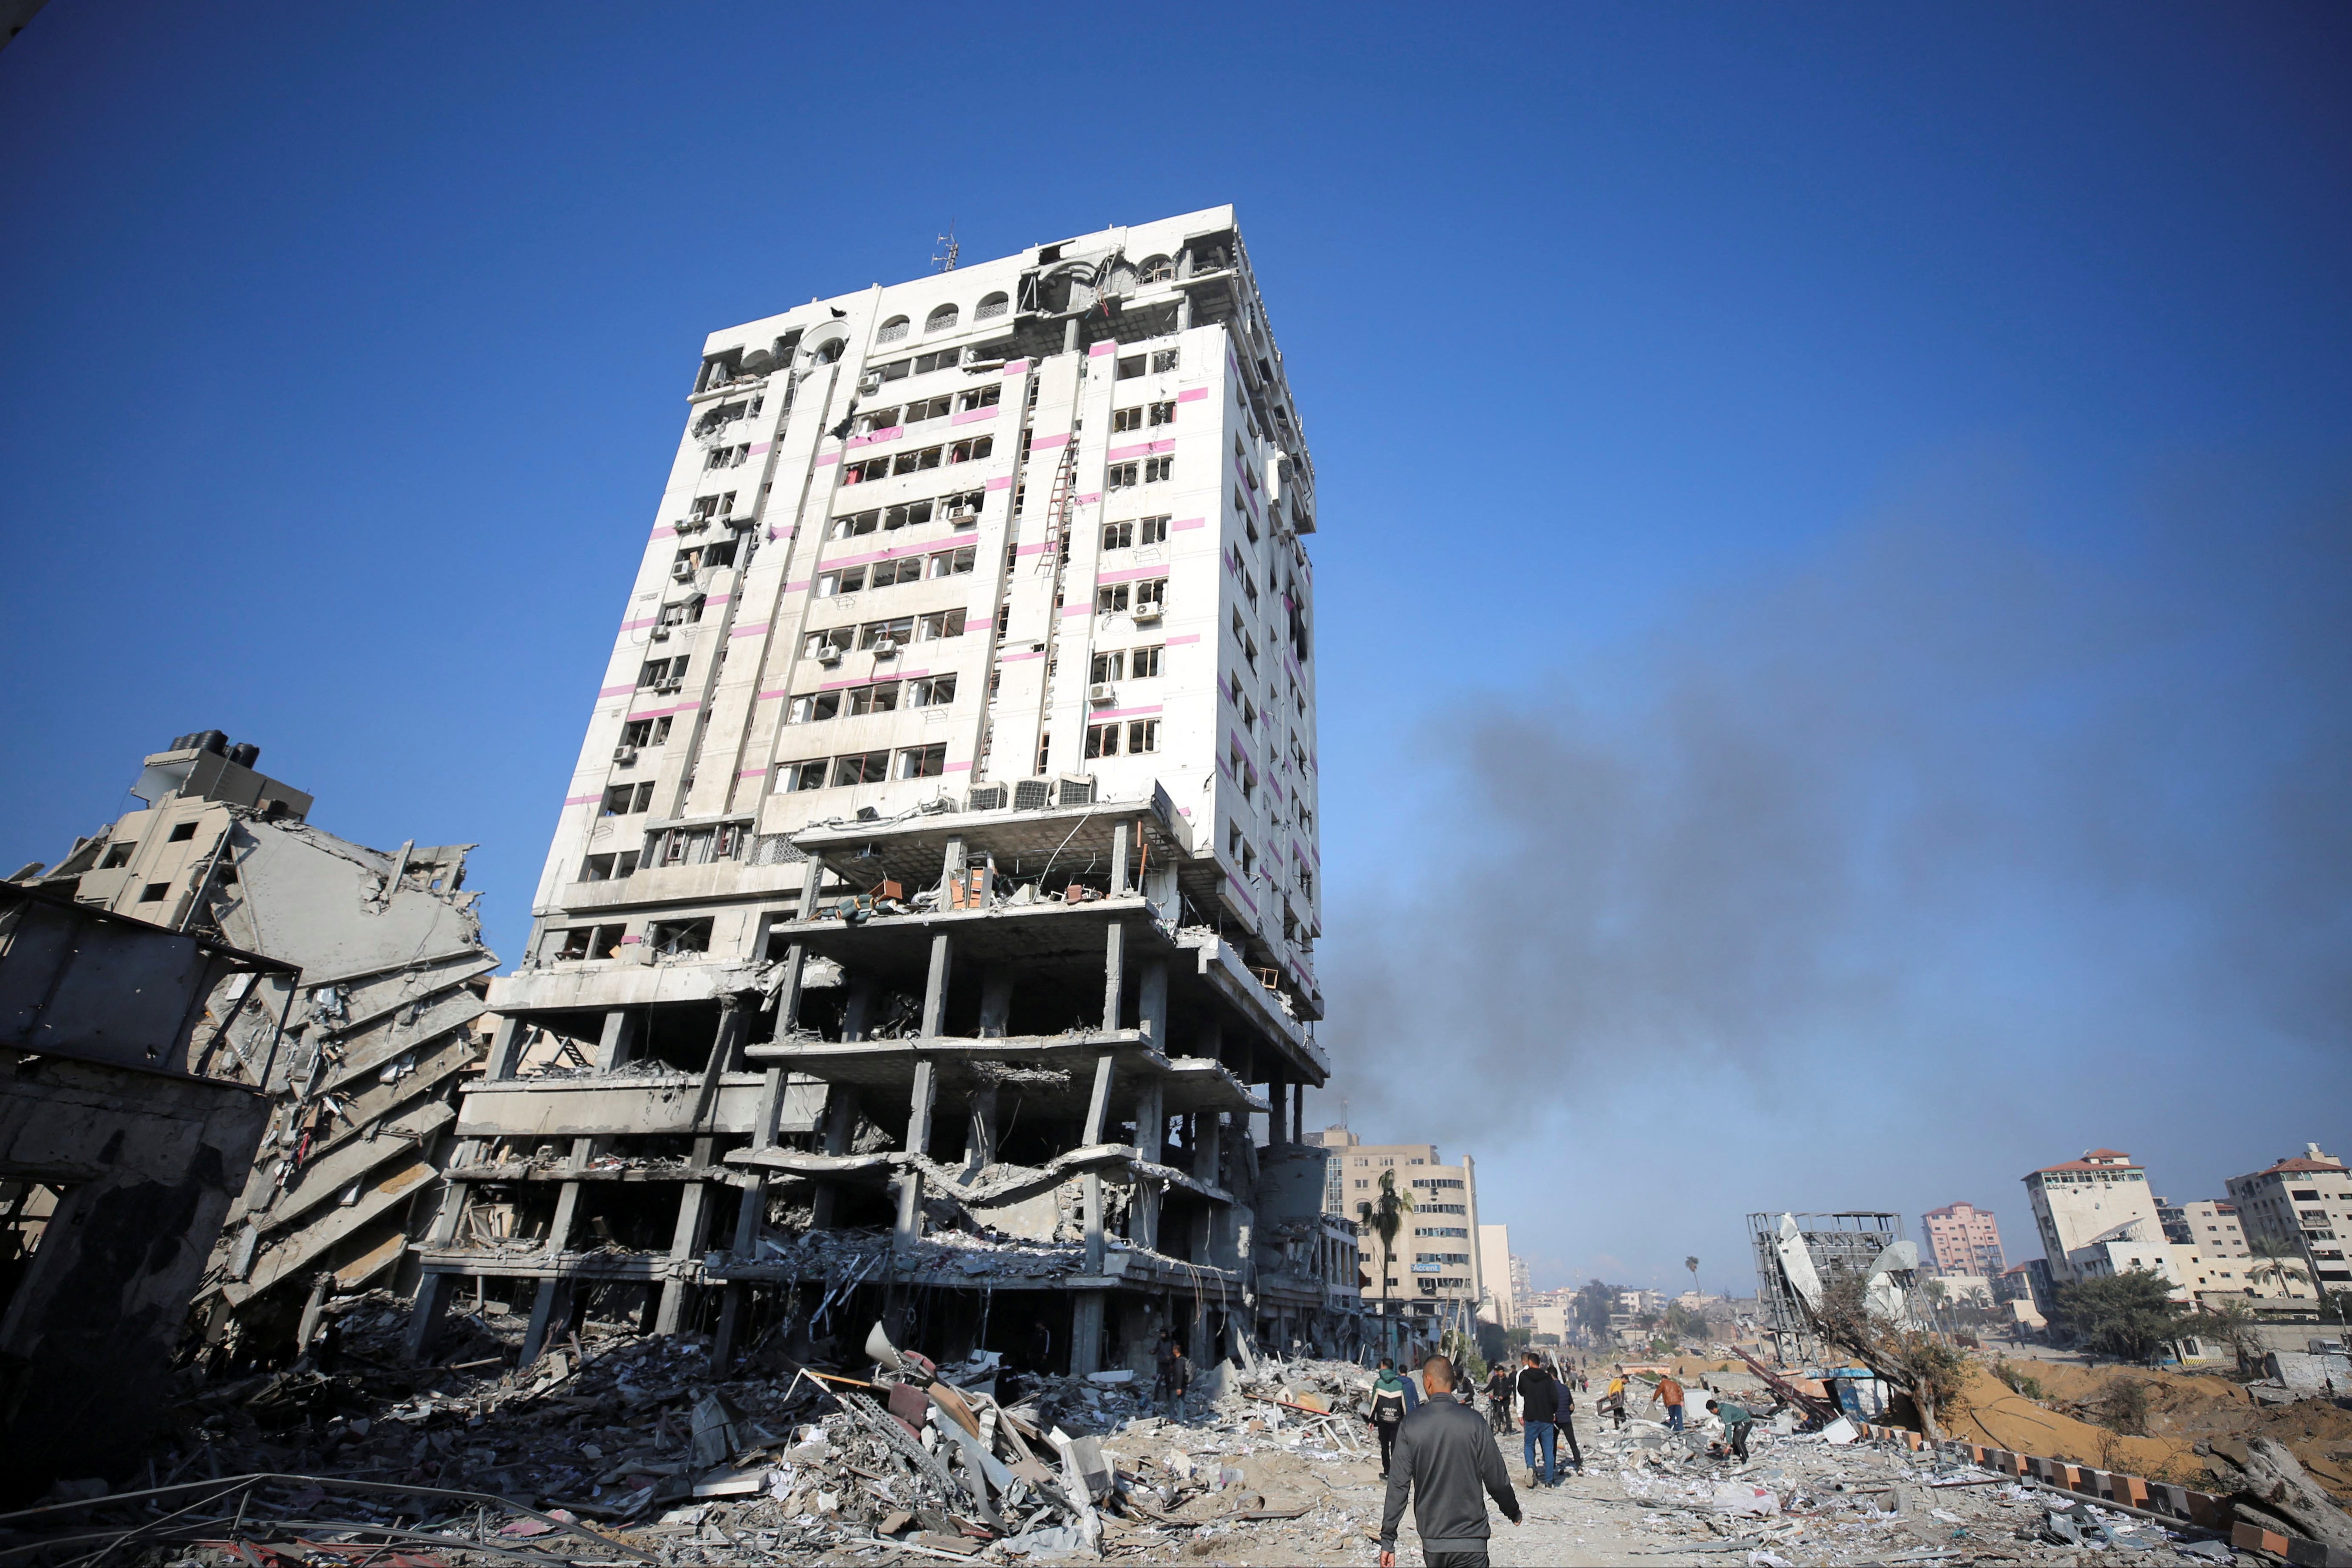 Gaza City has been devastated by Israel’s bombardment